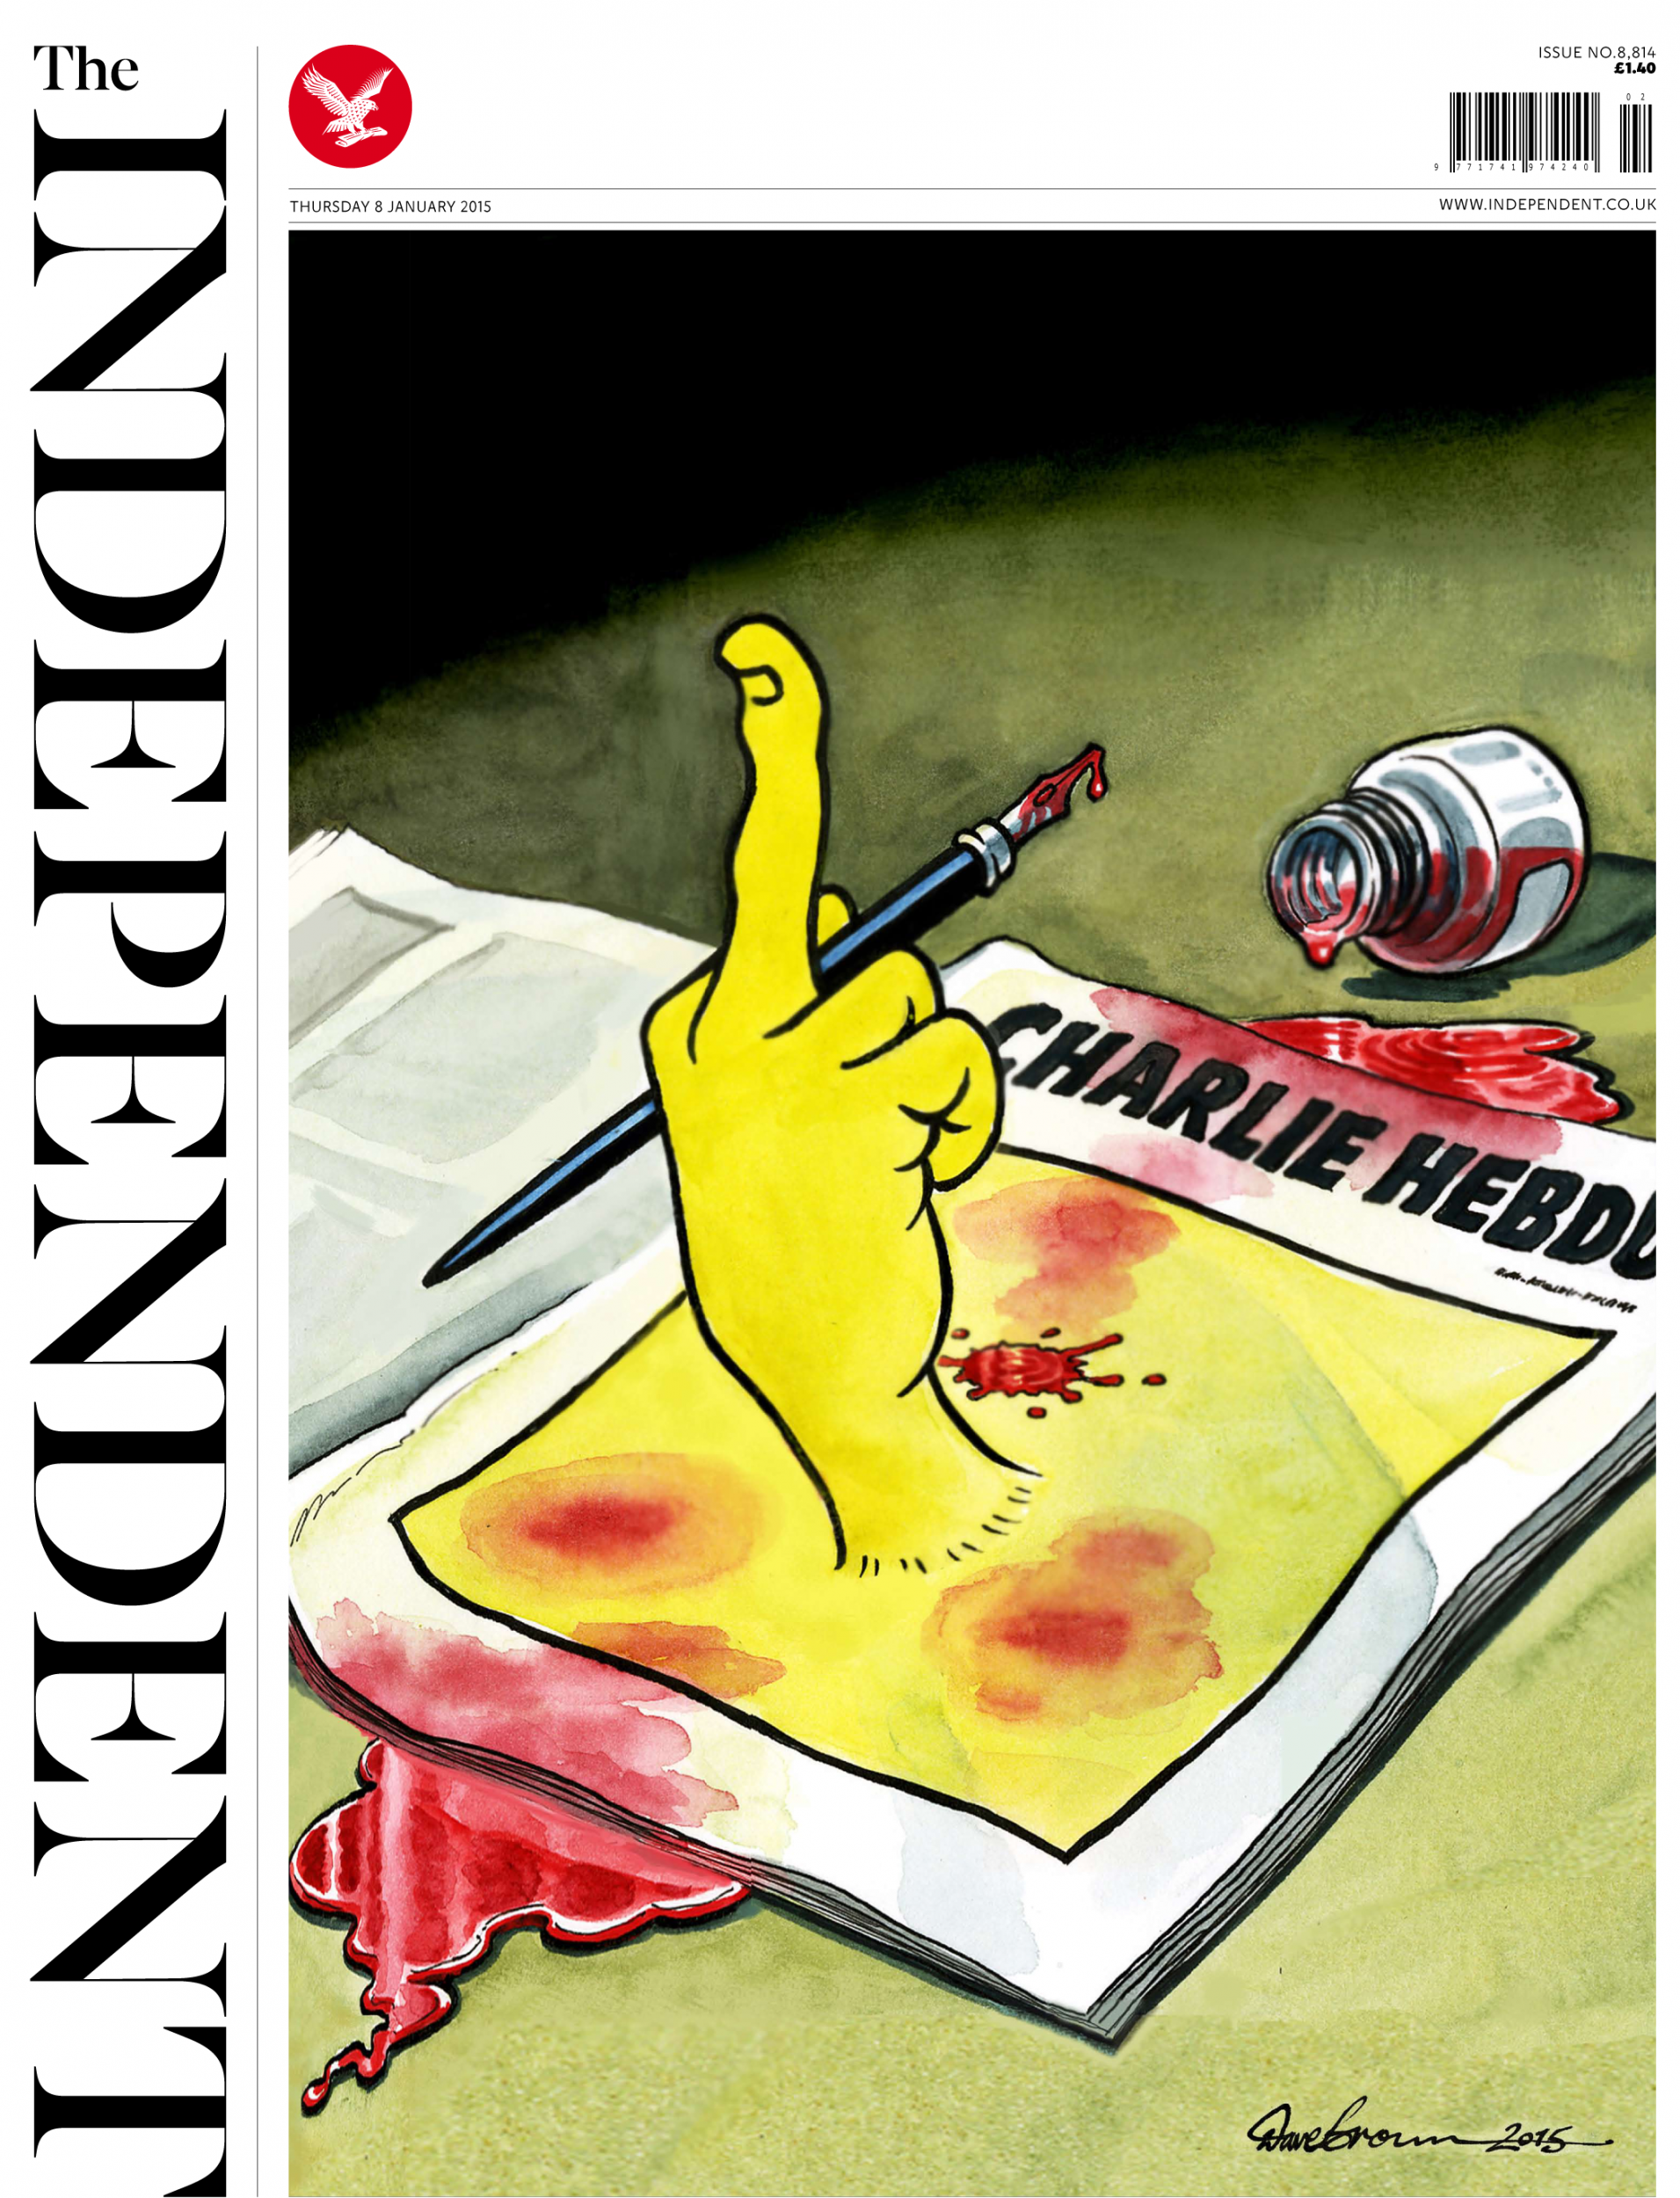 The Independent's response to last January's attack on Charlie Hebdo